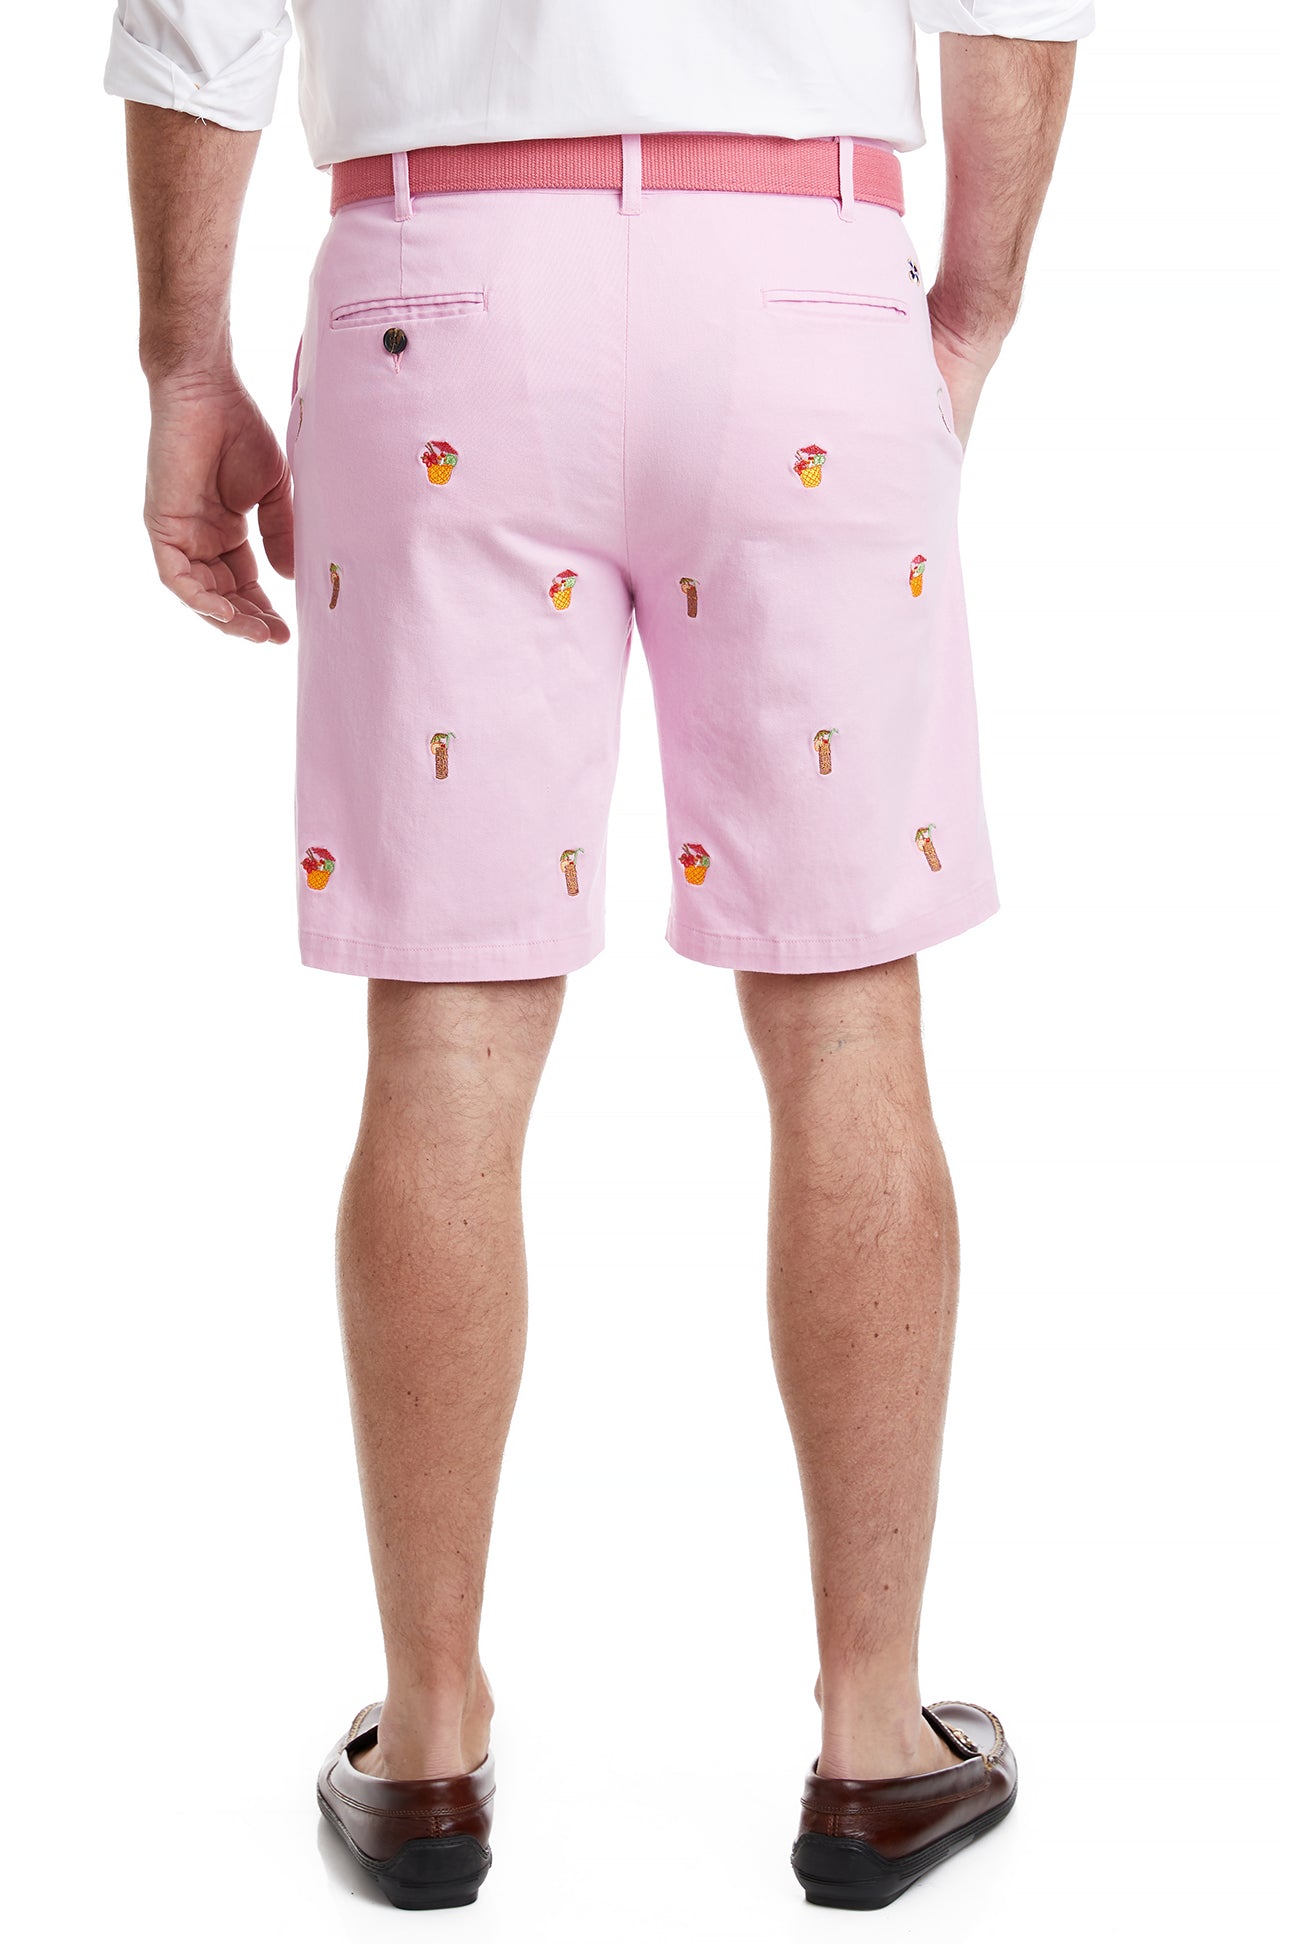 Cisco Short Stretch Twill Pink with Tiki and Cocunut Drinks MENS EMBROIDERED SHORTS Castaway Nantucket Island